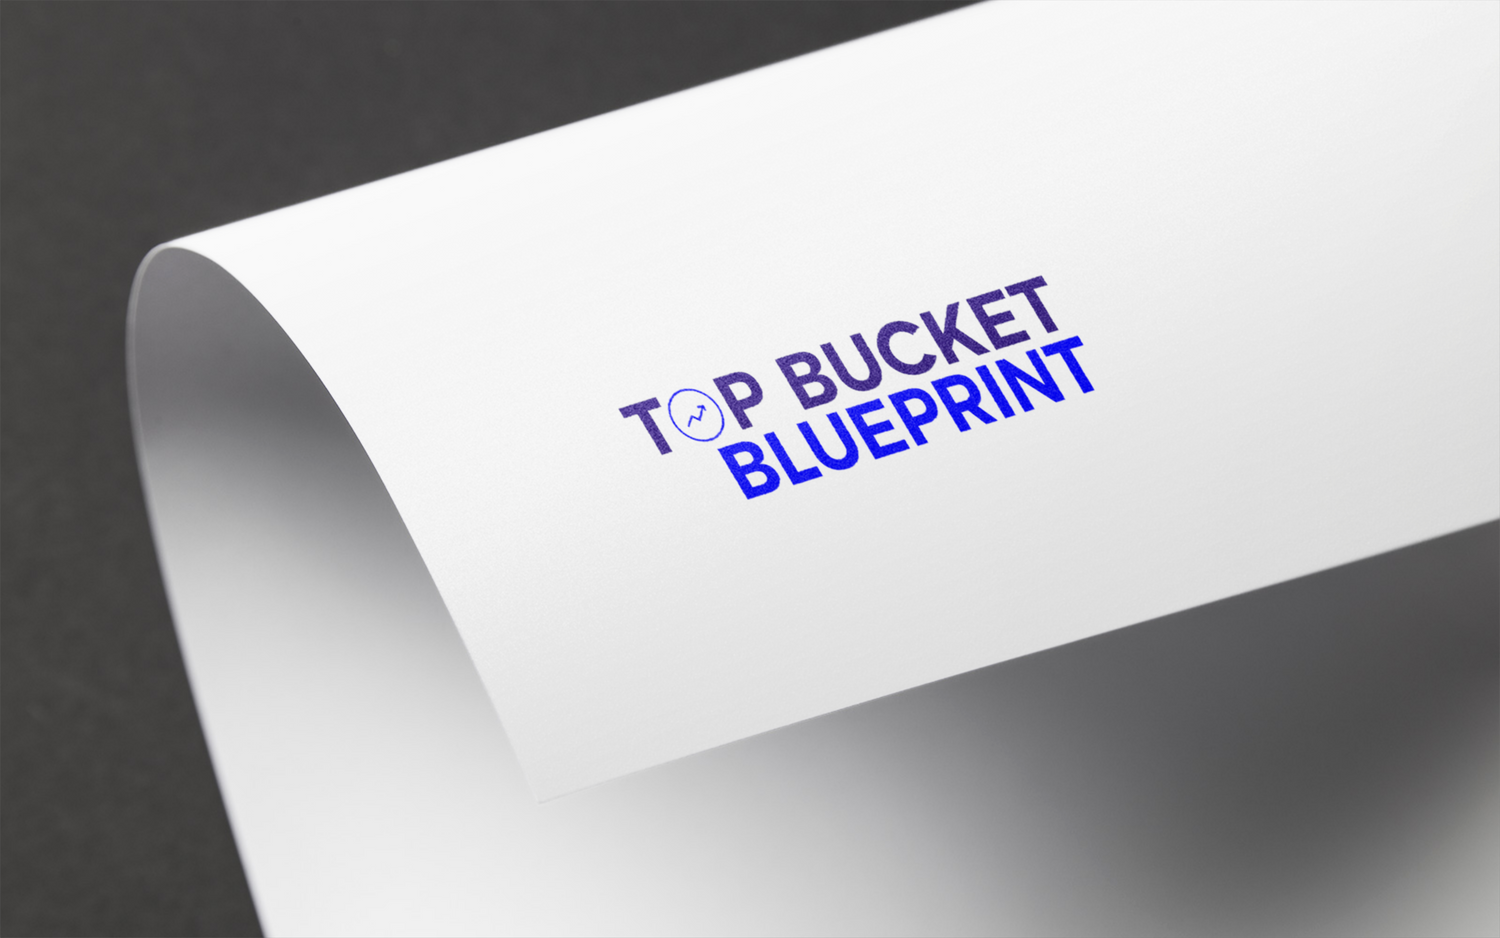 Top Bucket Blueprint Investment Banking Resume Reviews